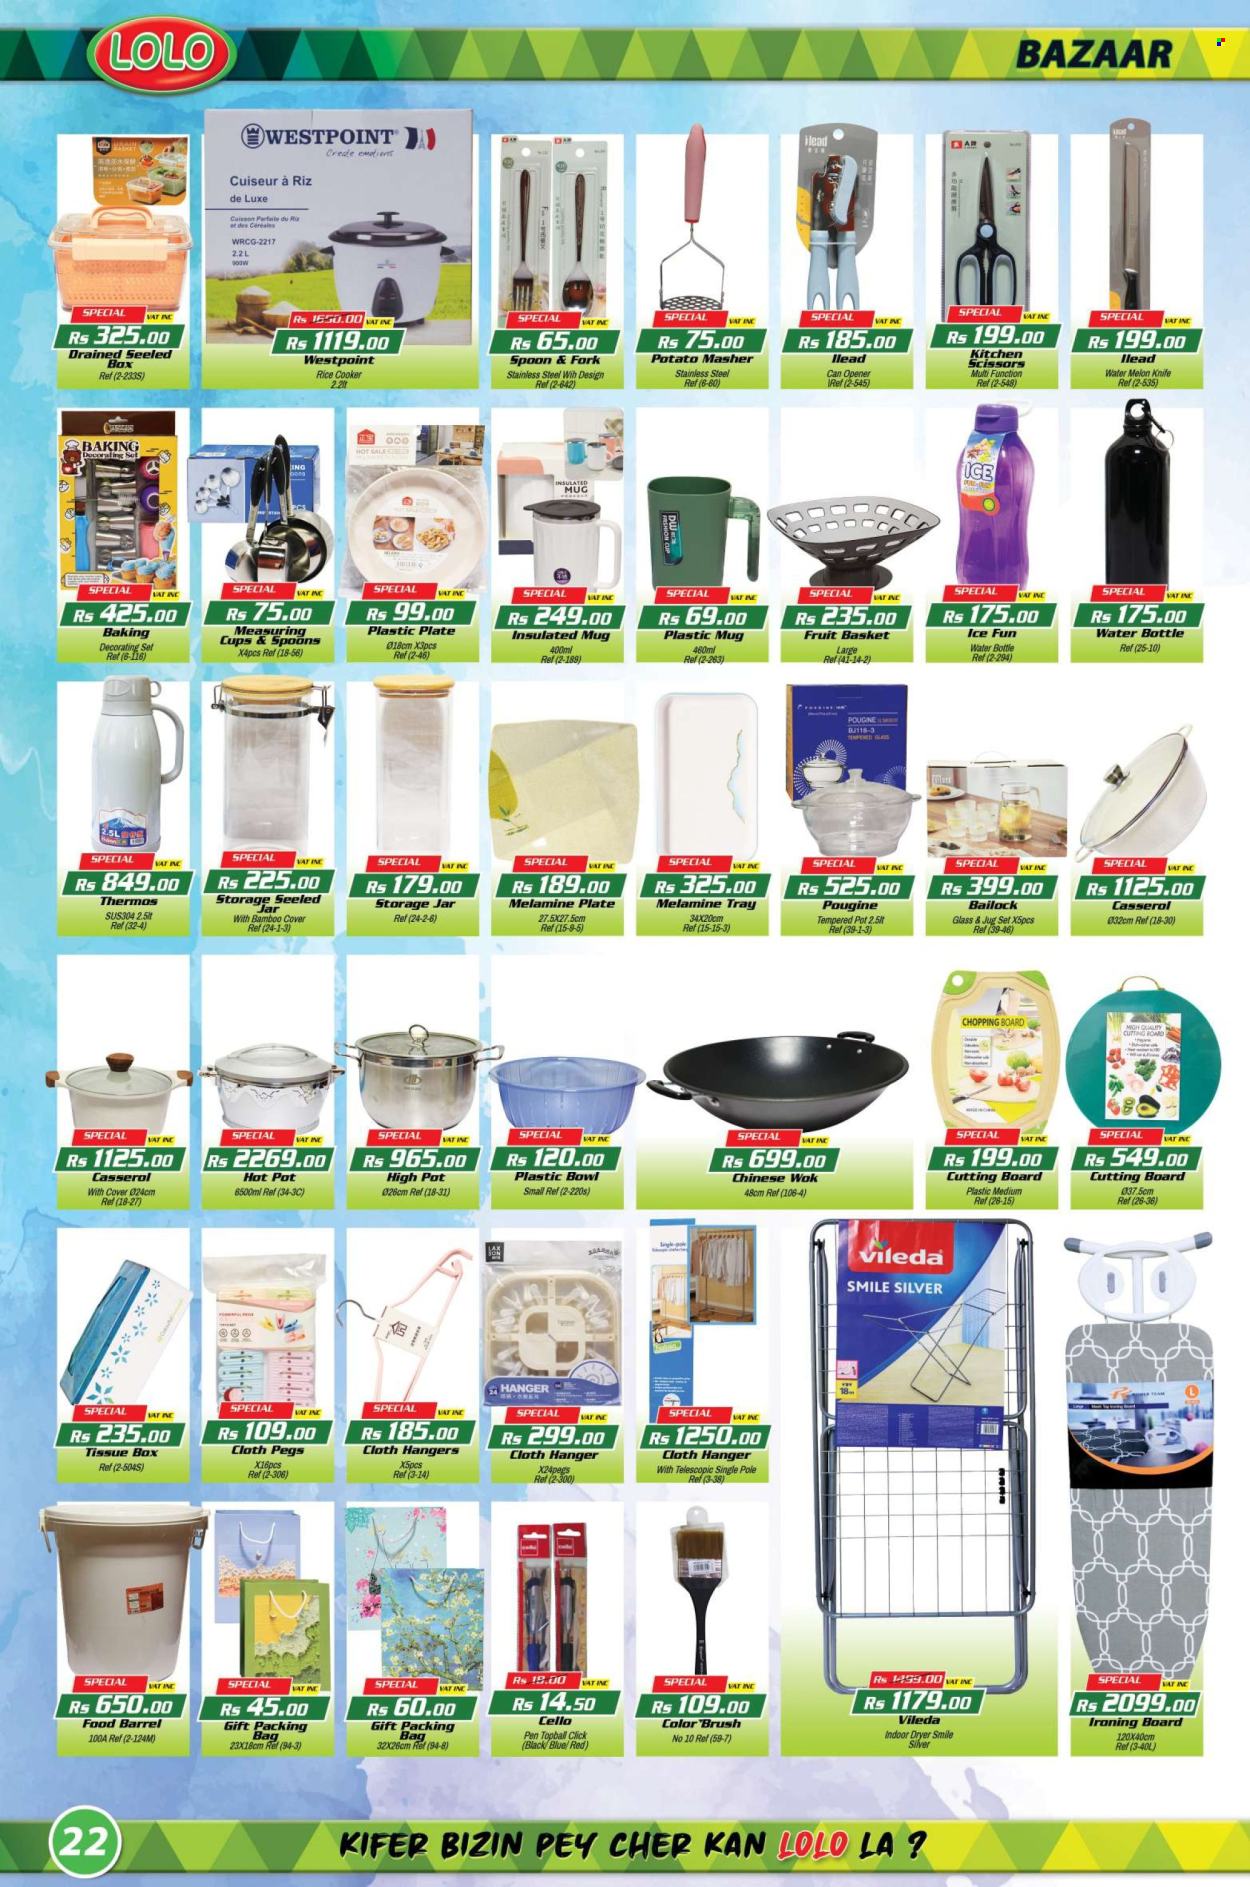 thumbnail - LOLO Hyper Catalogue - 27.04.2024 - 15.05.2024 - Sales products - watermelon, melons, bag, basket, knife, hanger, Vileda, ironing board, brush, storage jar, cutting board, fork, mug, spoon, plate, pot, chopping board, wok, rice cooker, bamboo cover, drink bottle, tin opener, bowl, jar, pen, scissors, Cello, plastic plate, houseplant. Page 22.